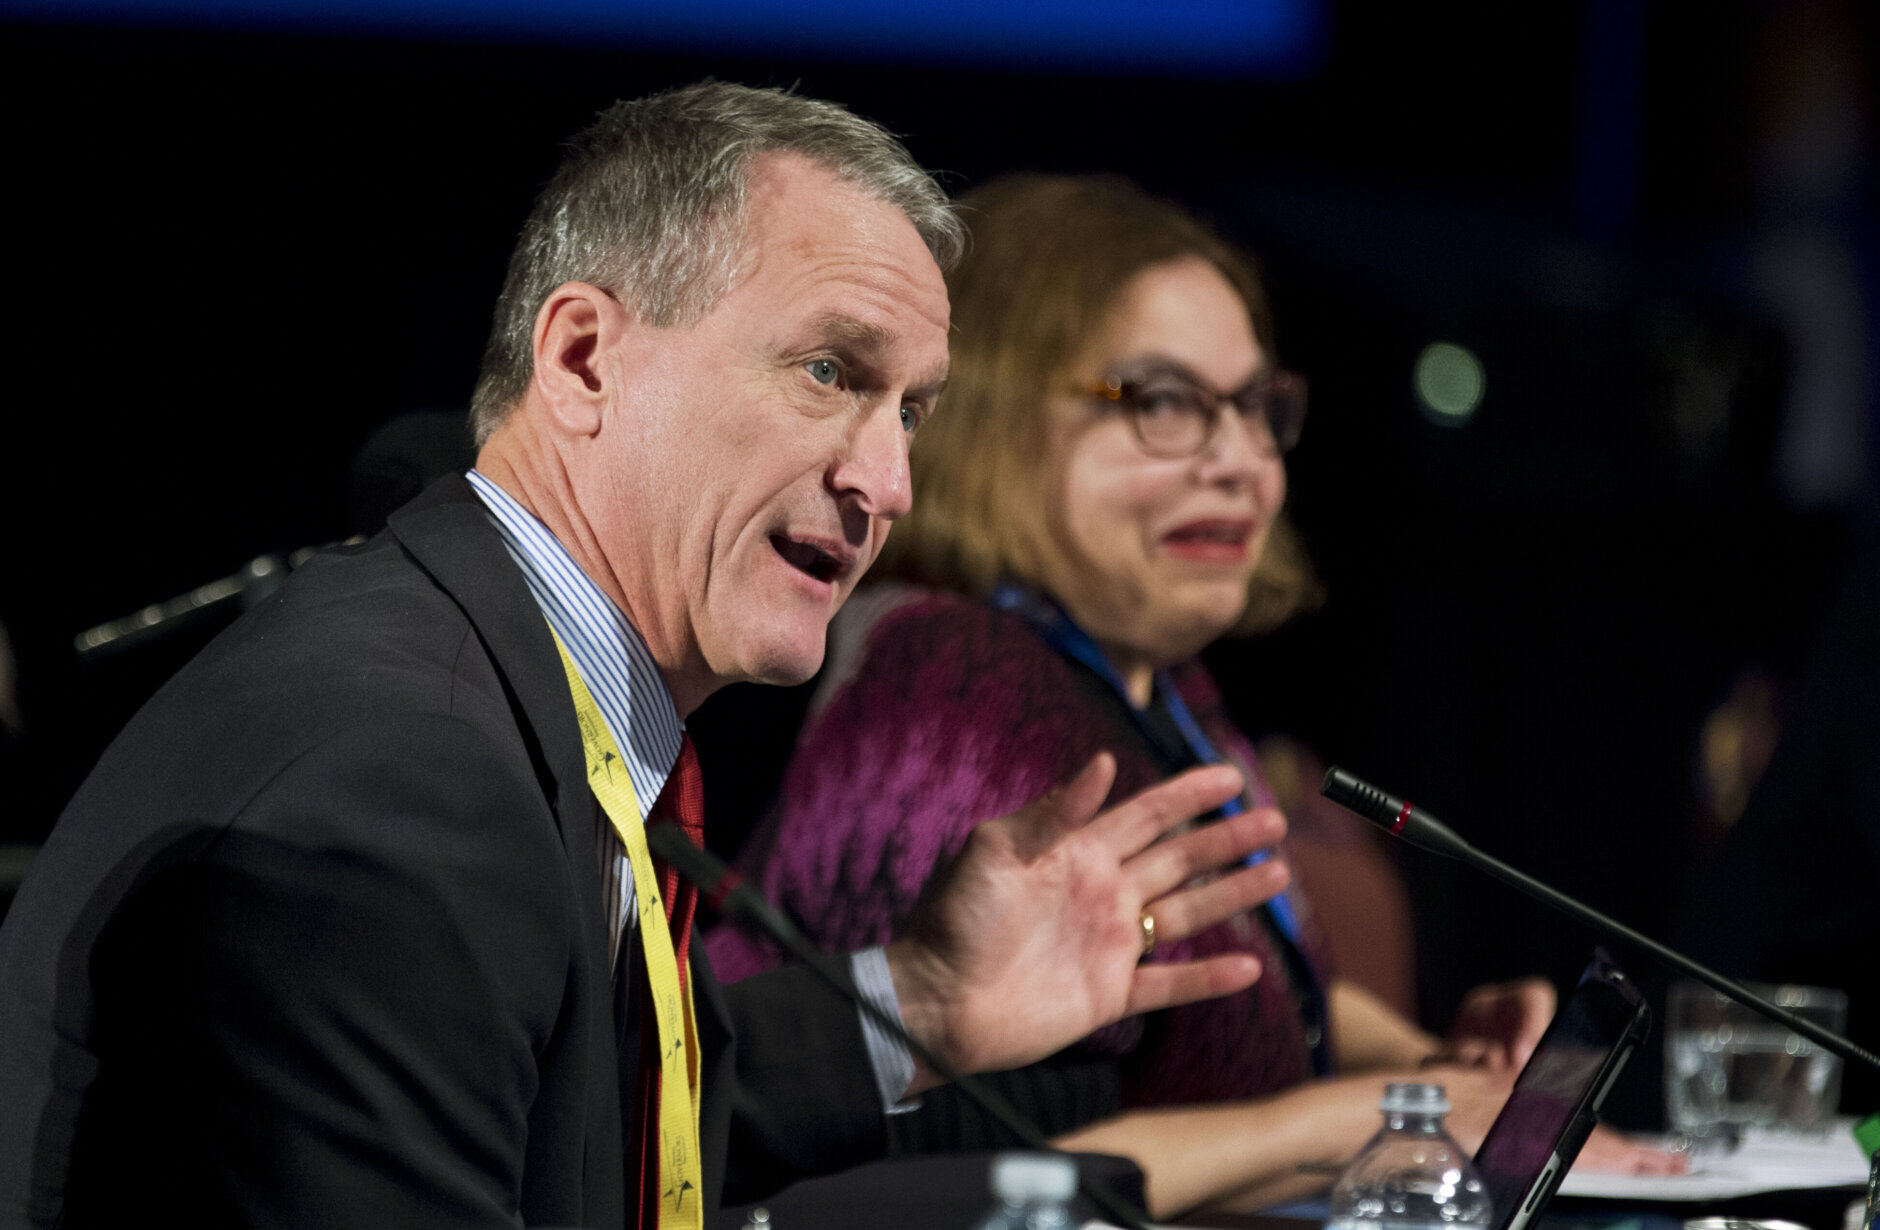 South Dakota Gov. Dennis Daugaard, talks about growing up with his father who was born deaf and cannot speak, during a special session of the National Governors Association 2013 Winter Meeting in Washington, Sunday, Feb. 24, 2013. Seated on the right, is invited panelist Judith Heumann, special advisor for International Disability Rights, State Department. Governors Sunday roundly condemned the automatic budget cuts set to take hold this week, and hoped for a deal to stave off the $85 billion reduction in government services. (AP Photo/Manuel Balce Ceneta)